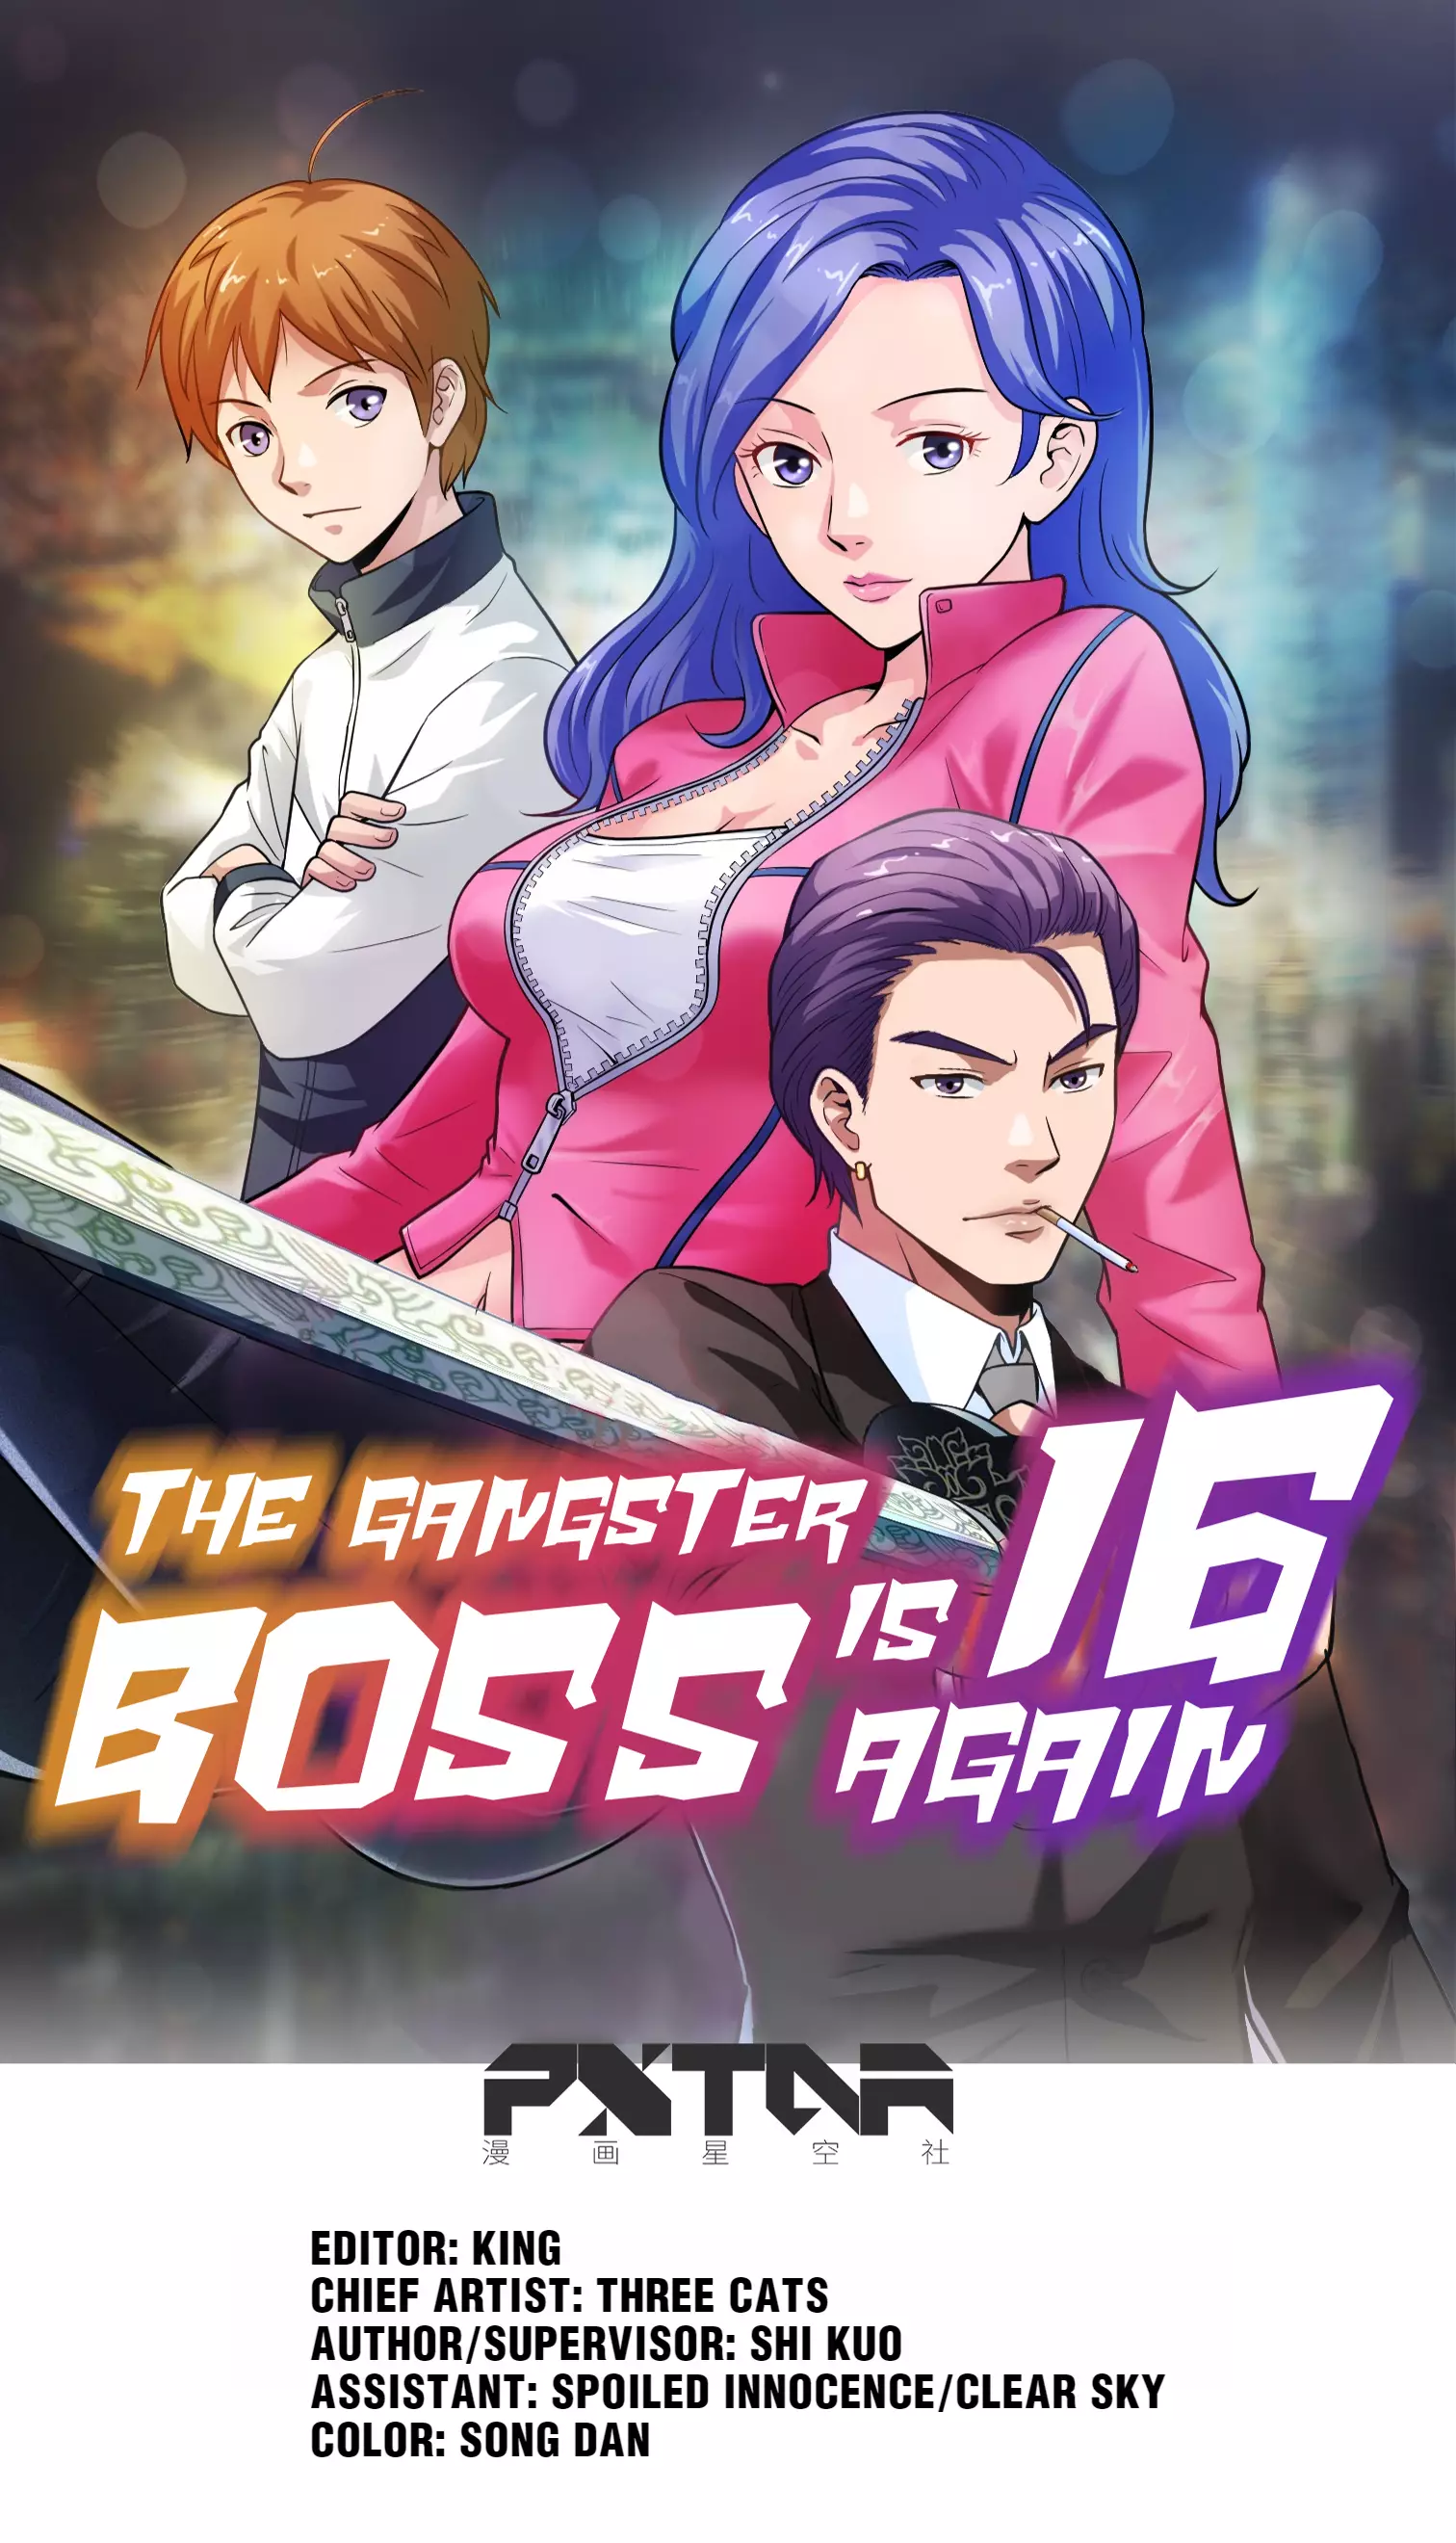 The Gangster Boss Is 16 Again - 15 page 1-594c5739